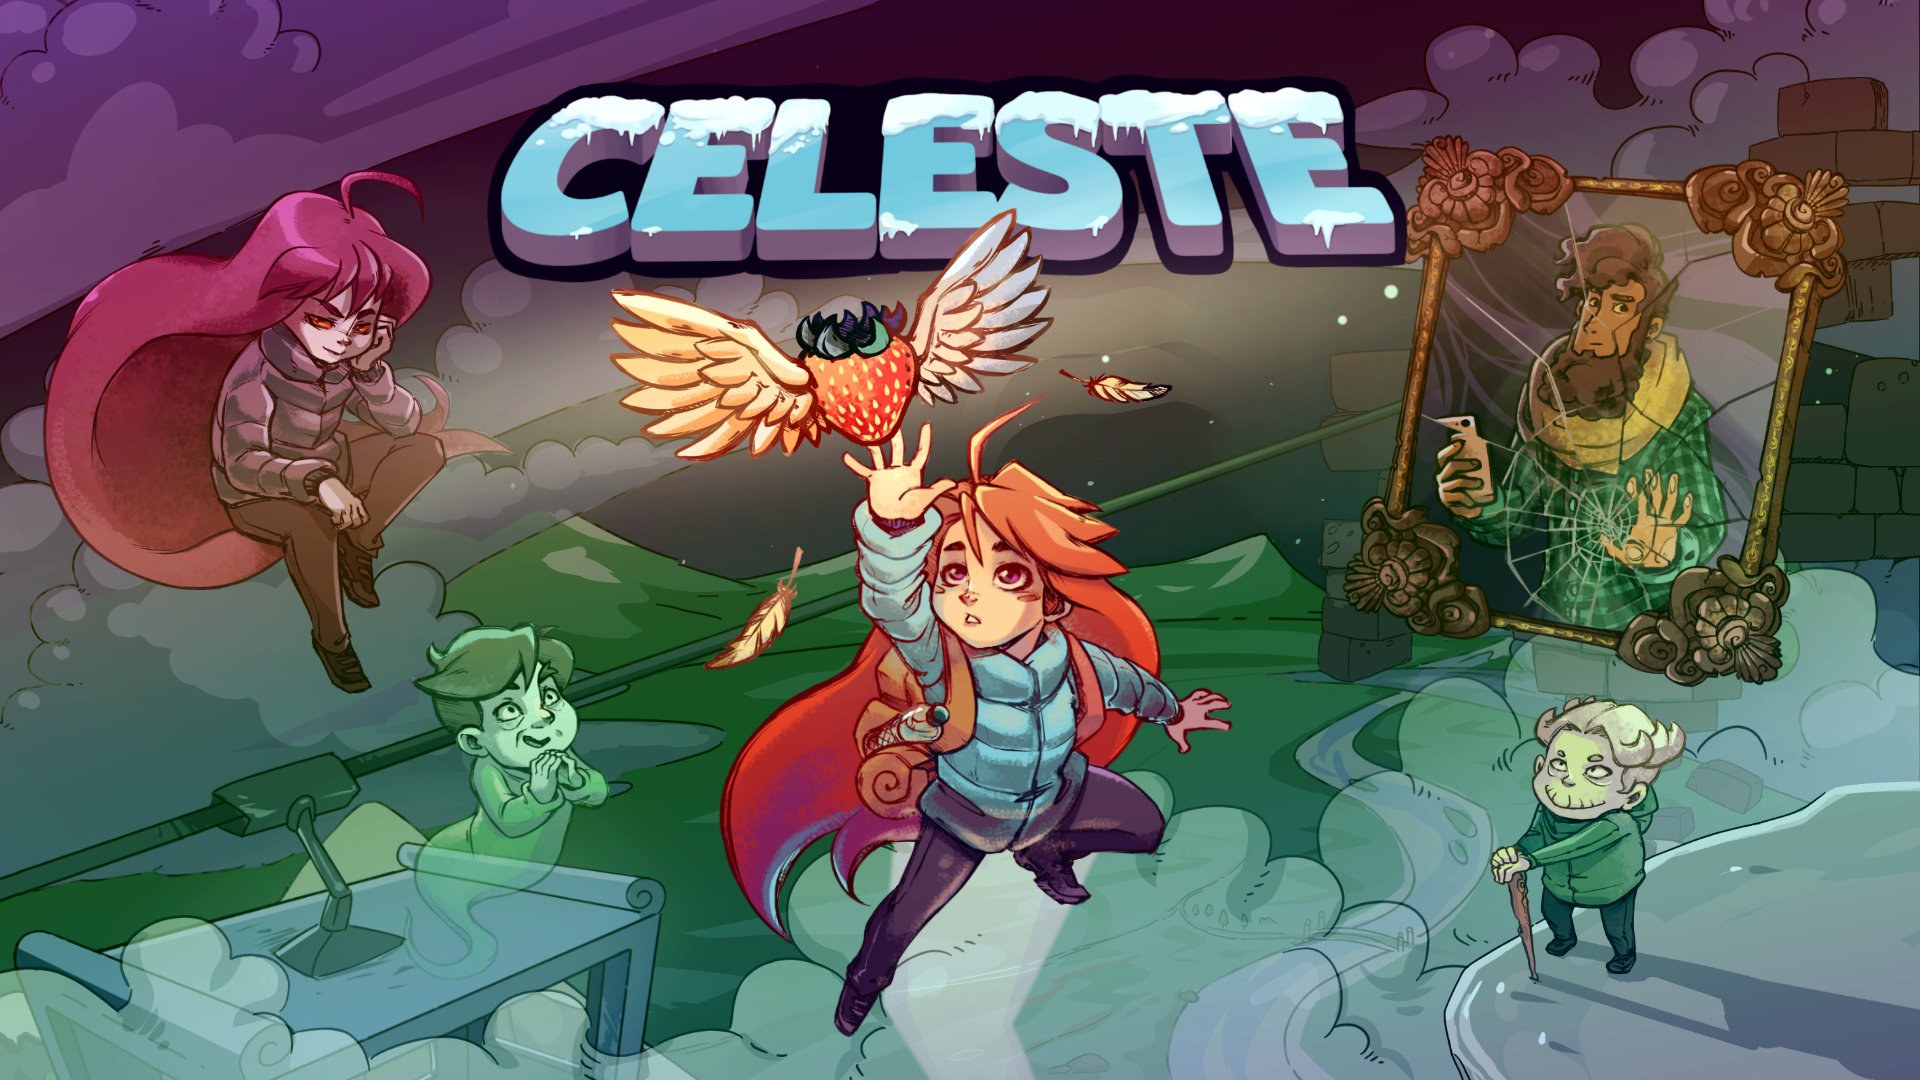 Logo image of the Celeste game, showing the main characters in scenes from the game